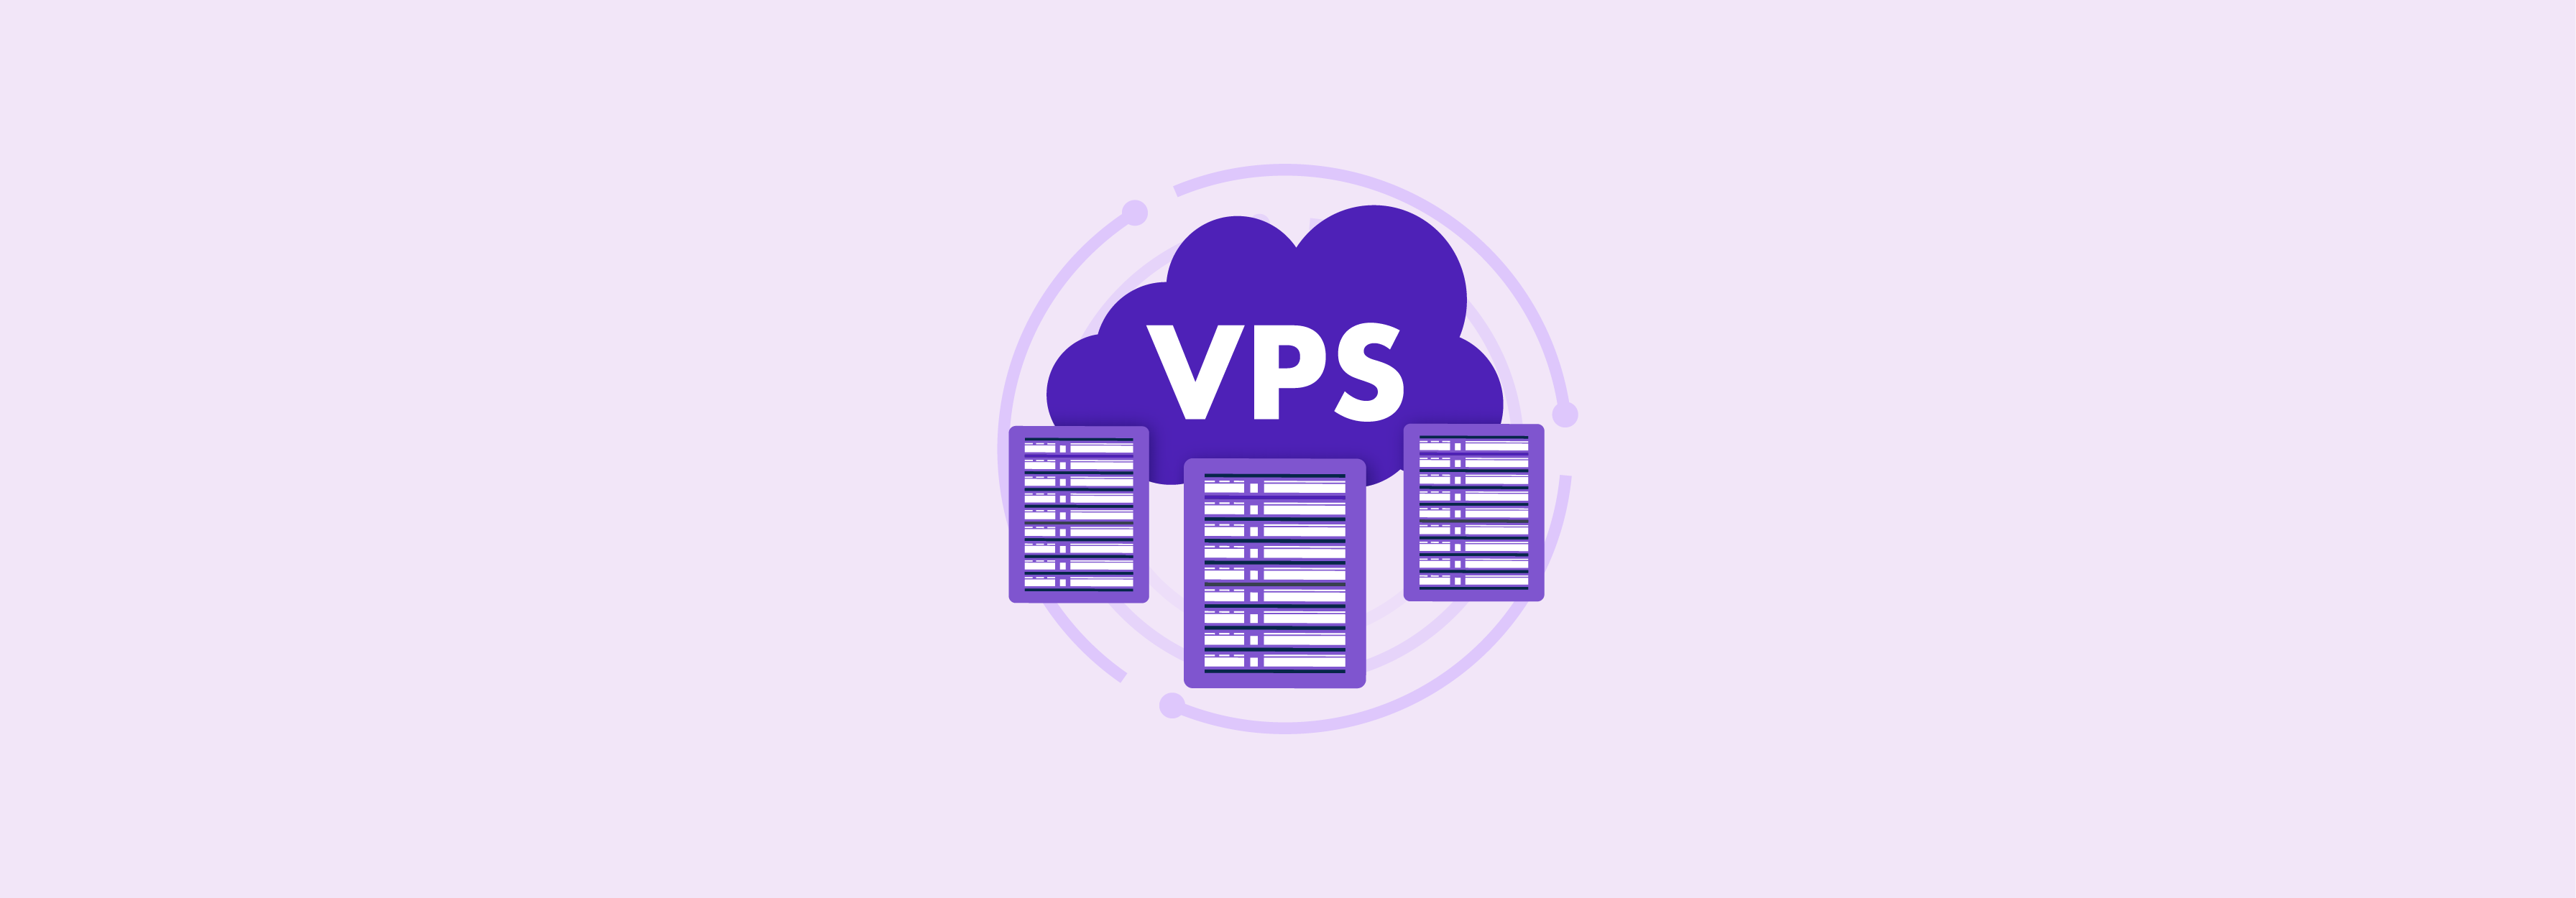 VPS Or Virtual Private Server